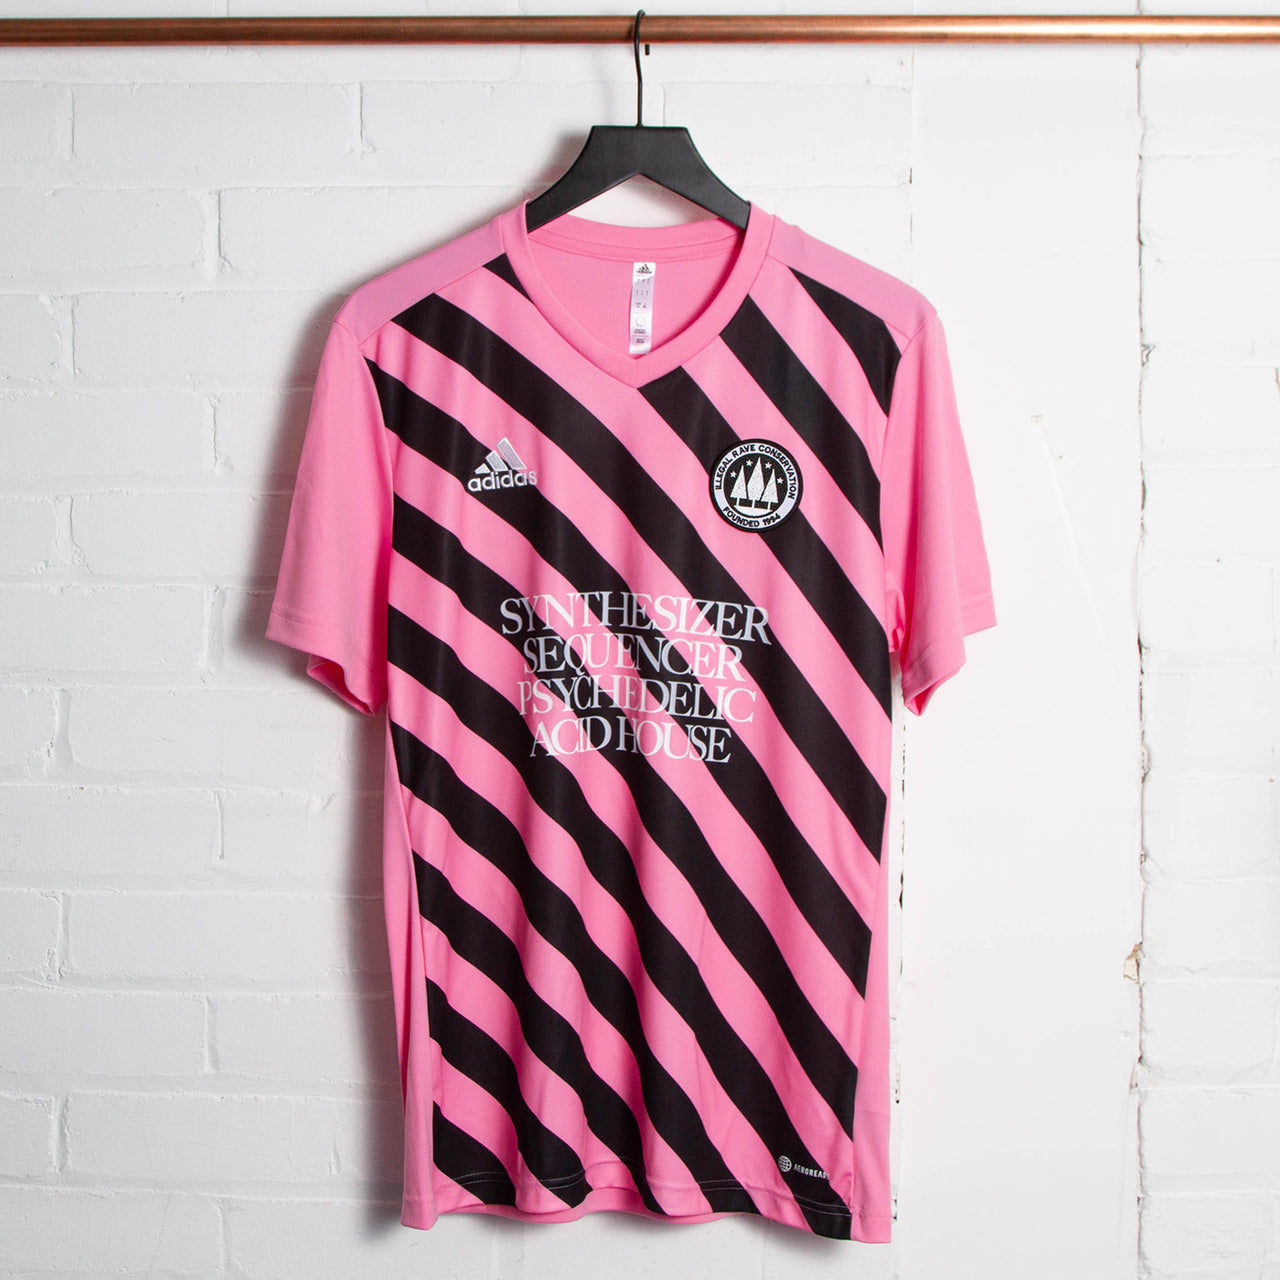 Wasted Heroes FC Entrada 22 - Training Jersey - Striped Pink Glow Rave